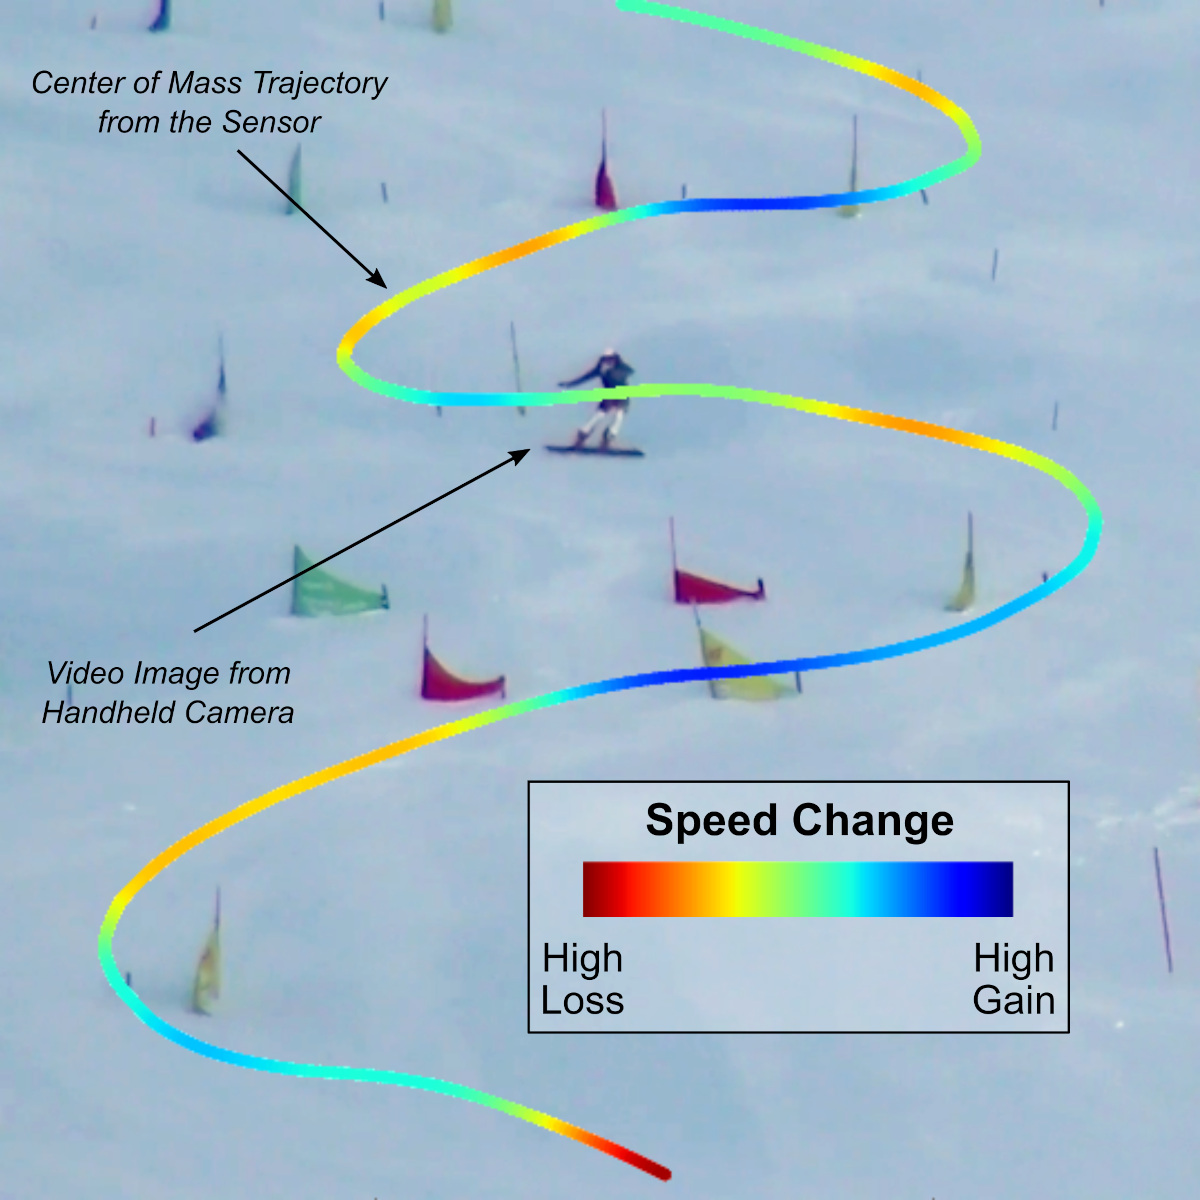 Skiing trajectory with speed loss and gain superposed on a video still image.